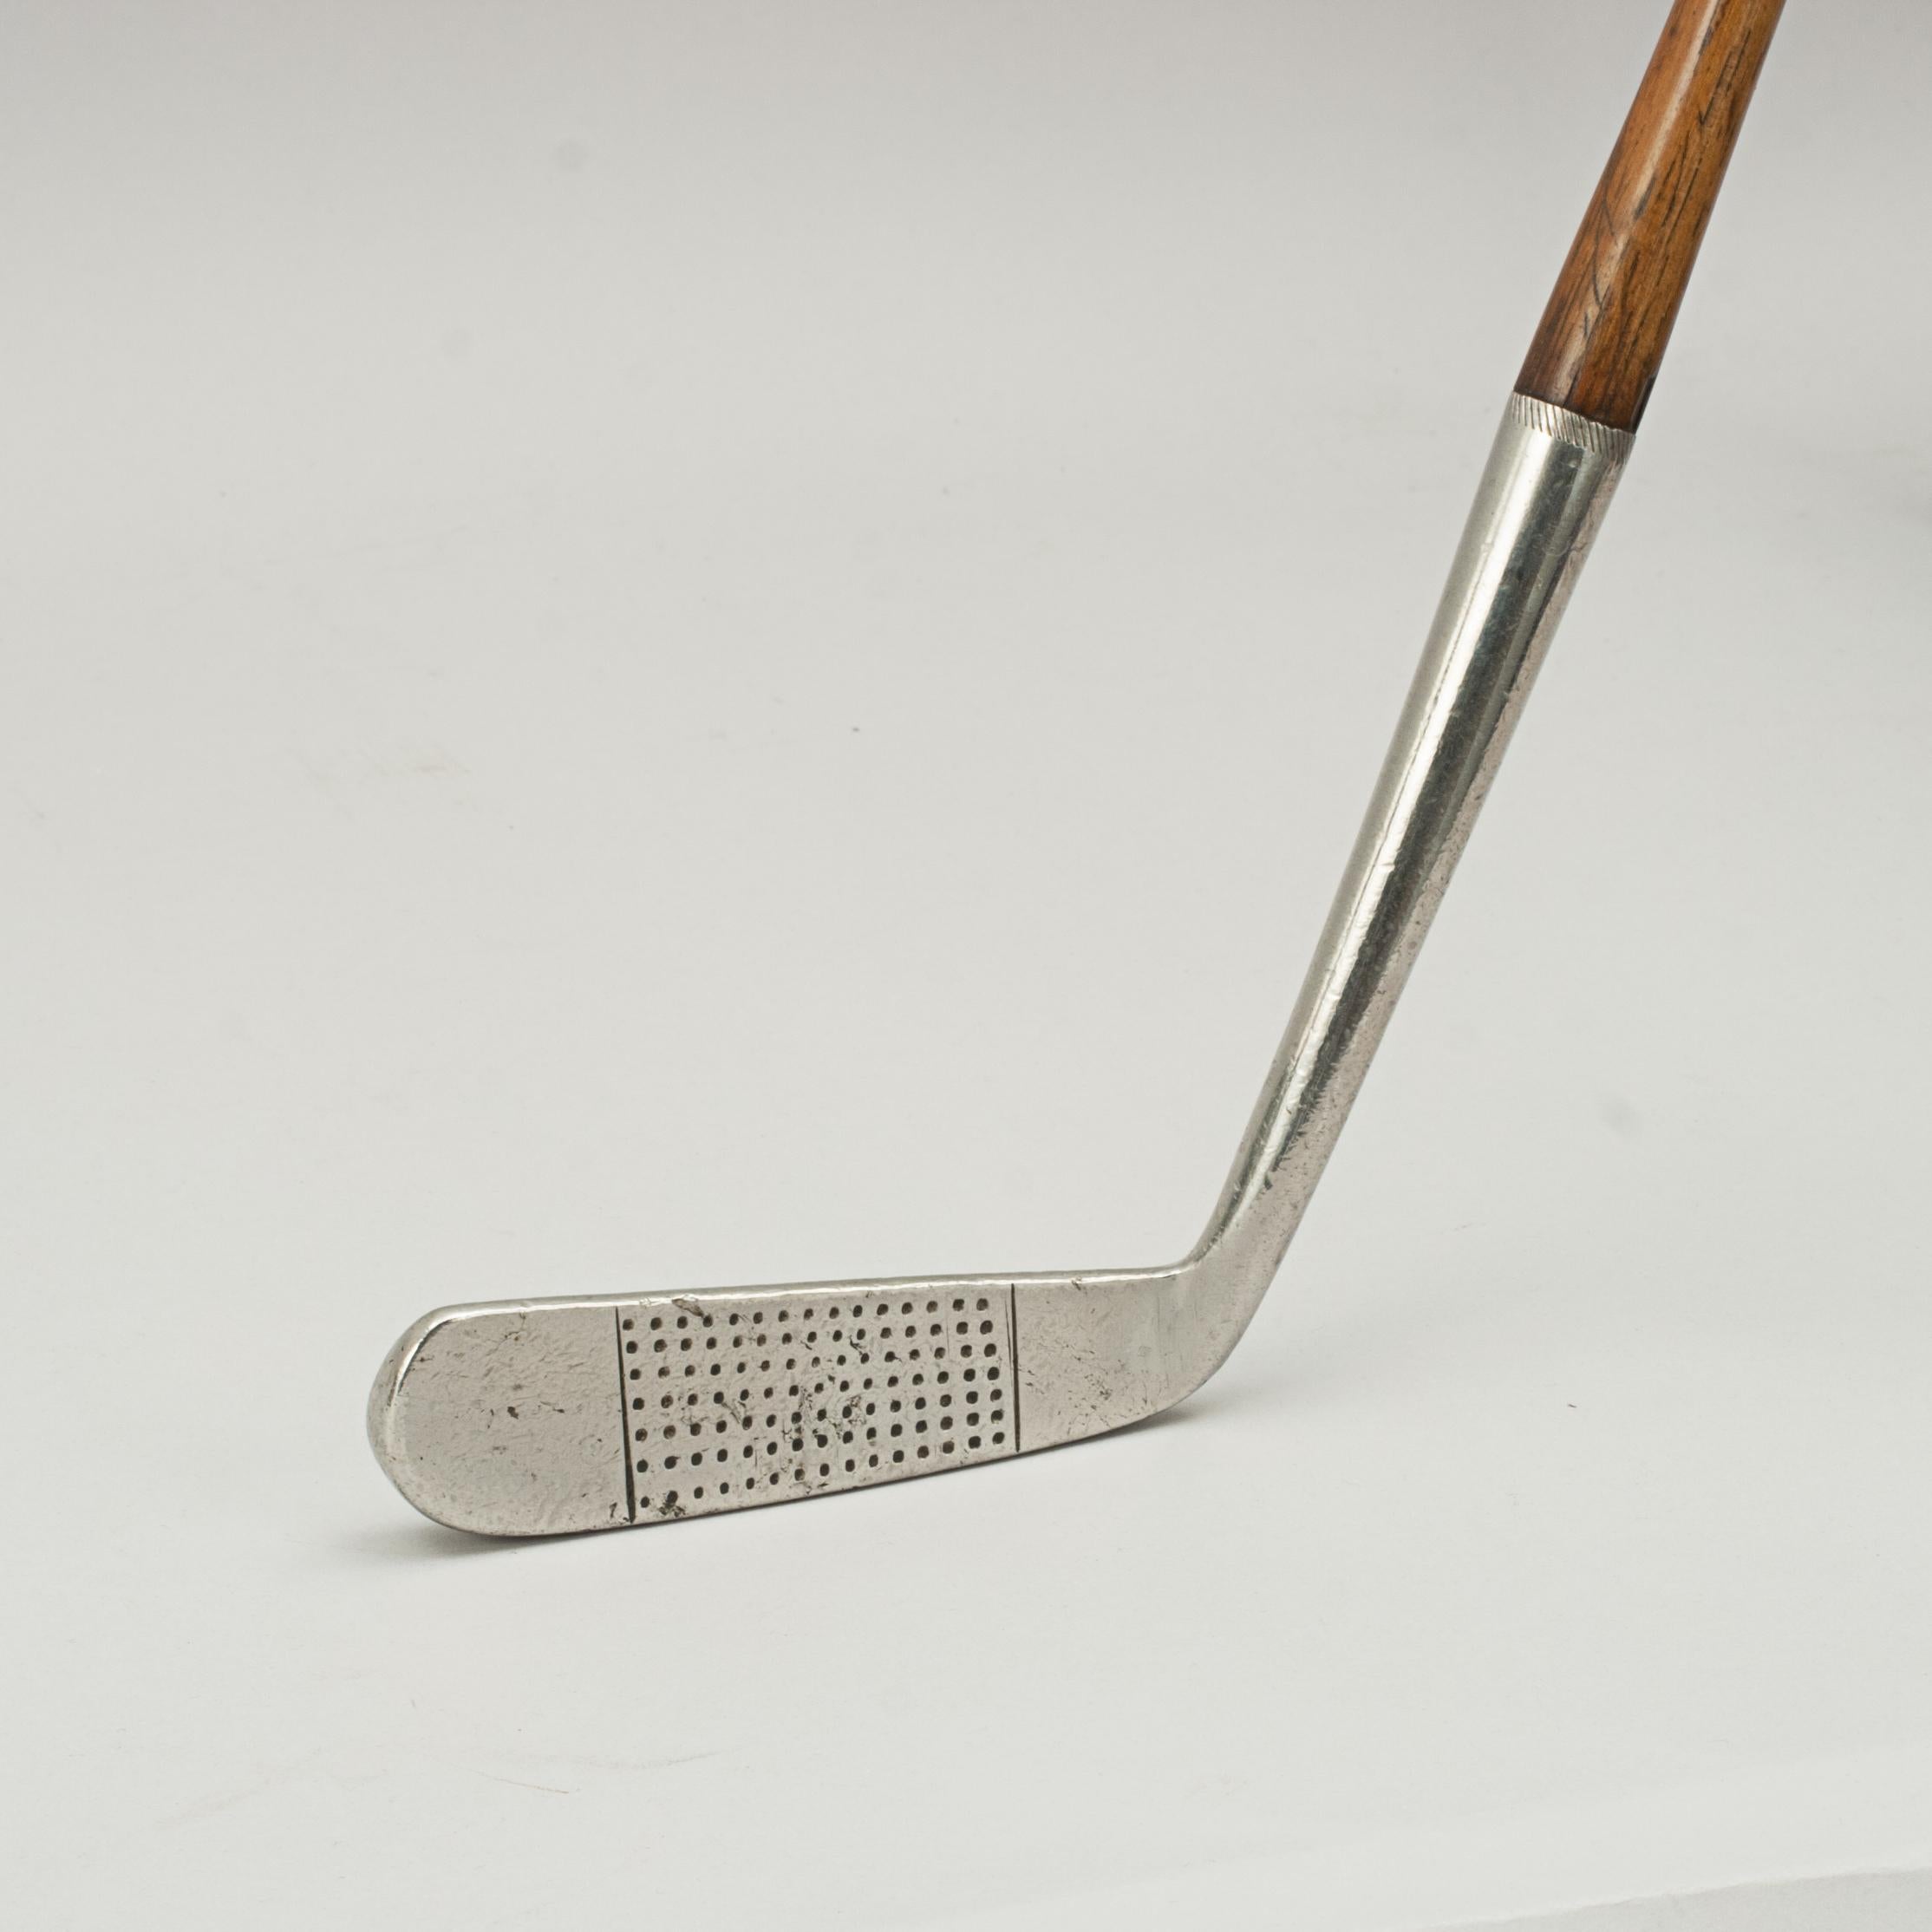 Vintage Hickory Blade Head Putter.
A fine playable hickory shafted putter. The hickory shaft with polished leather grip, the club head is stamped with a 'Terrier' cleek mark and 'Terrier Regd. 17 Putter, Made in Scotland, Special, Rustless', J.